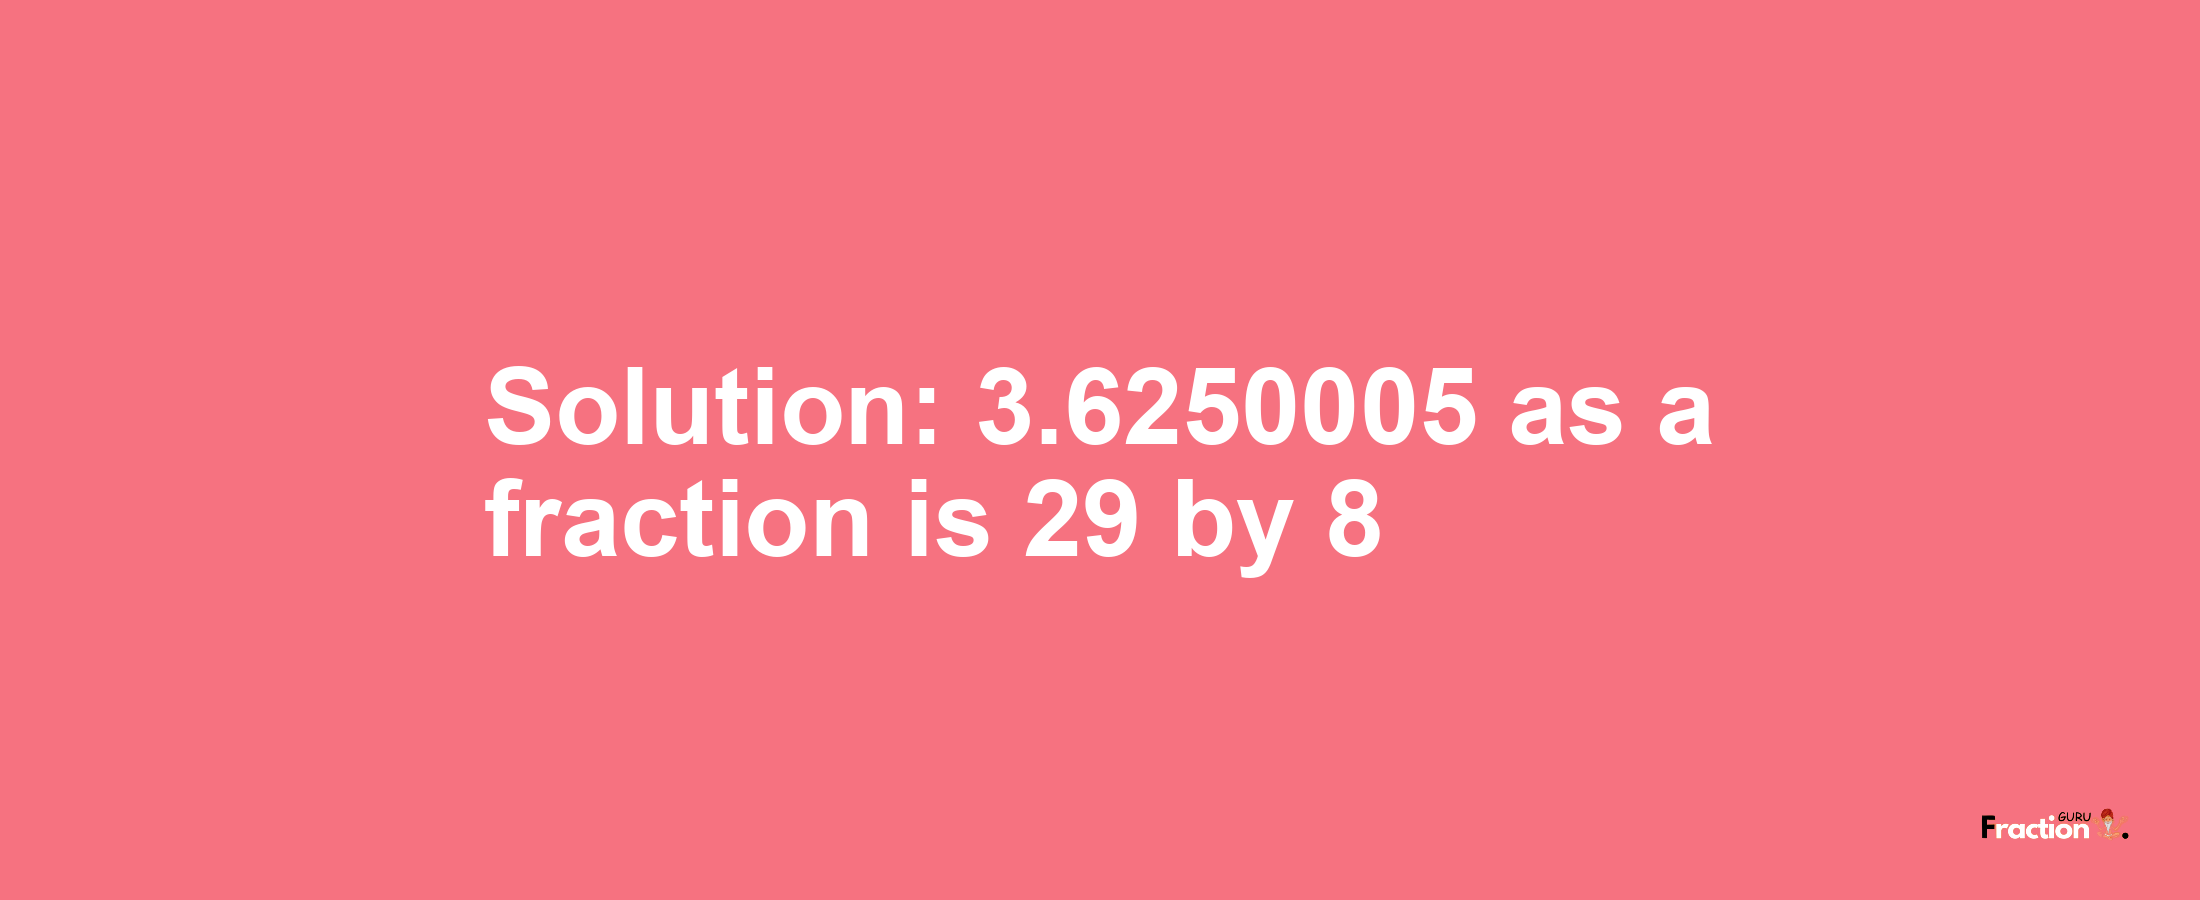 Solution:3.6250005 as a fraction is 29/8